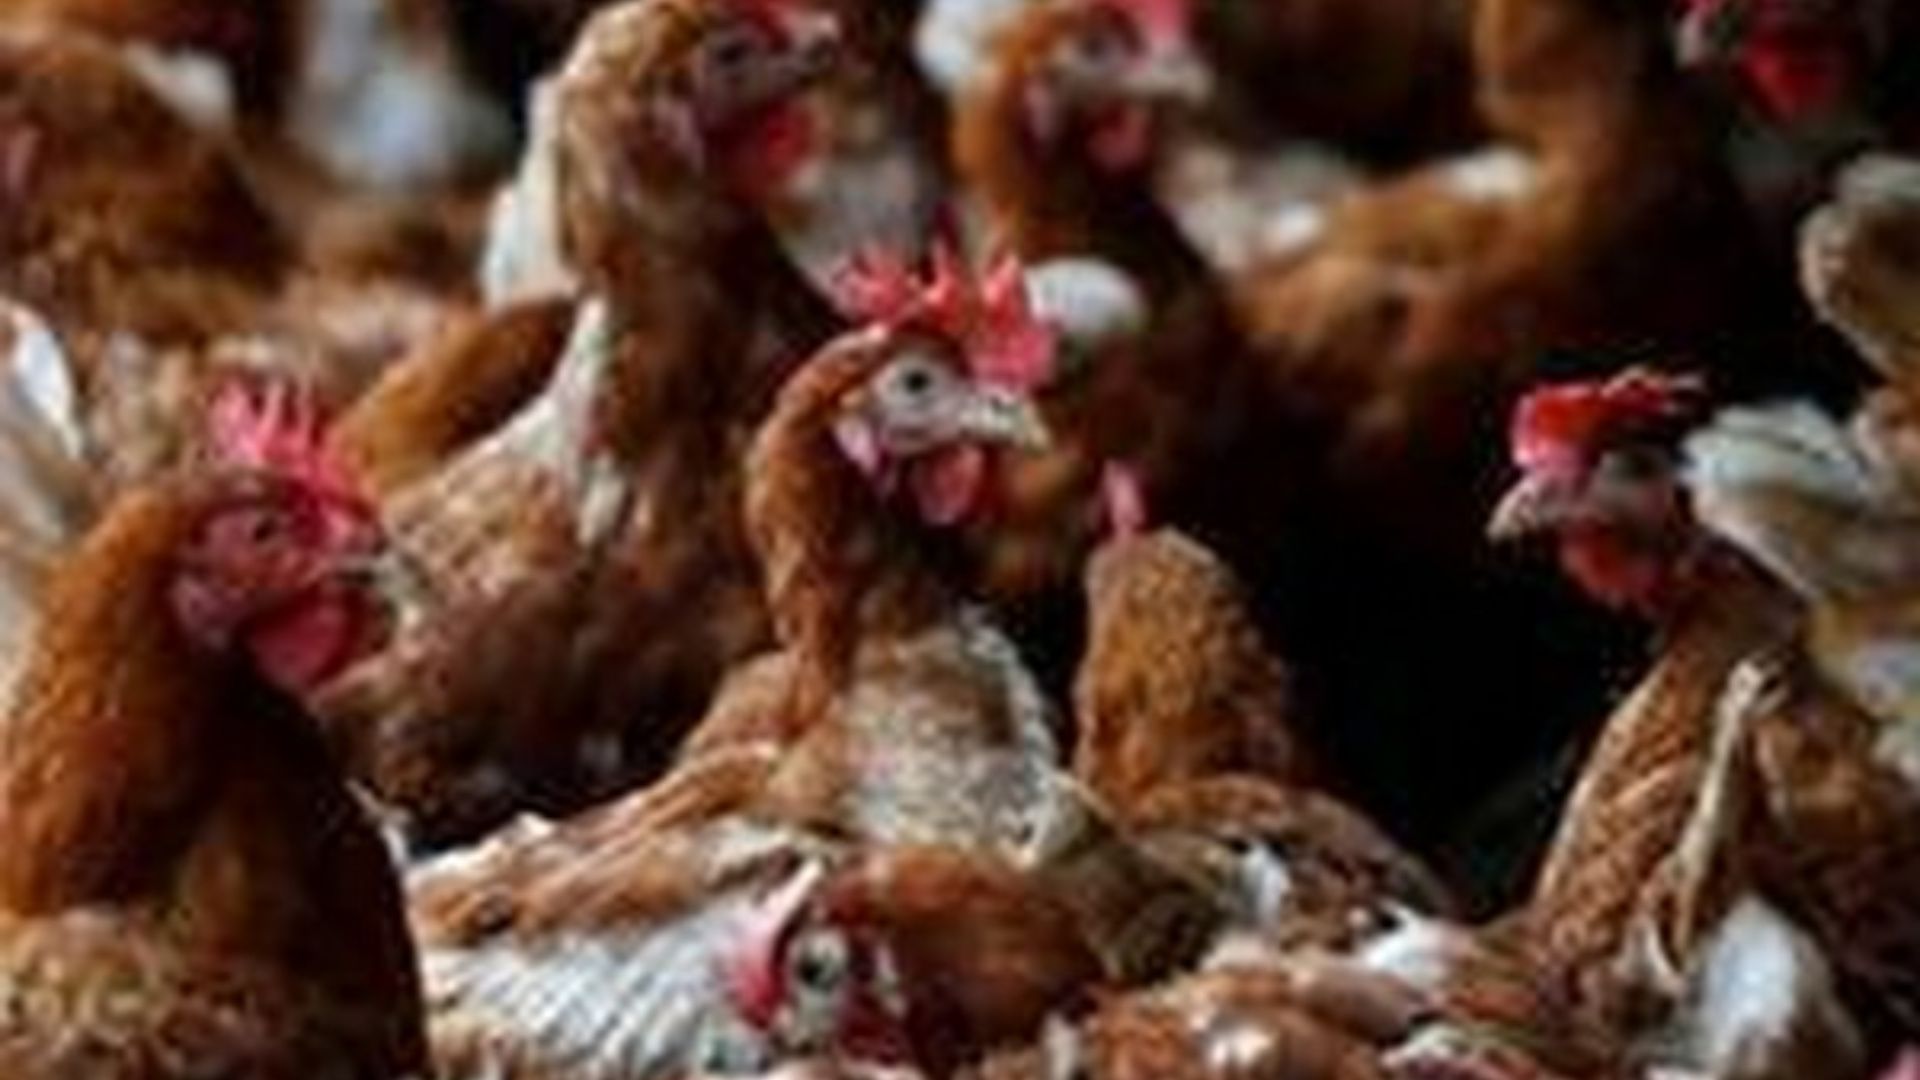 Experts alerts for possible outbreak of H5N1 bird flu epidemic